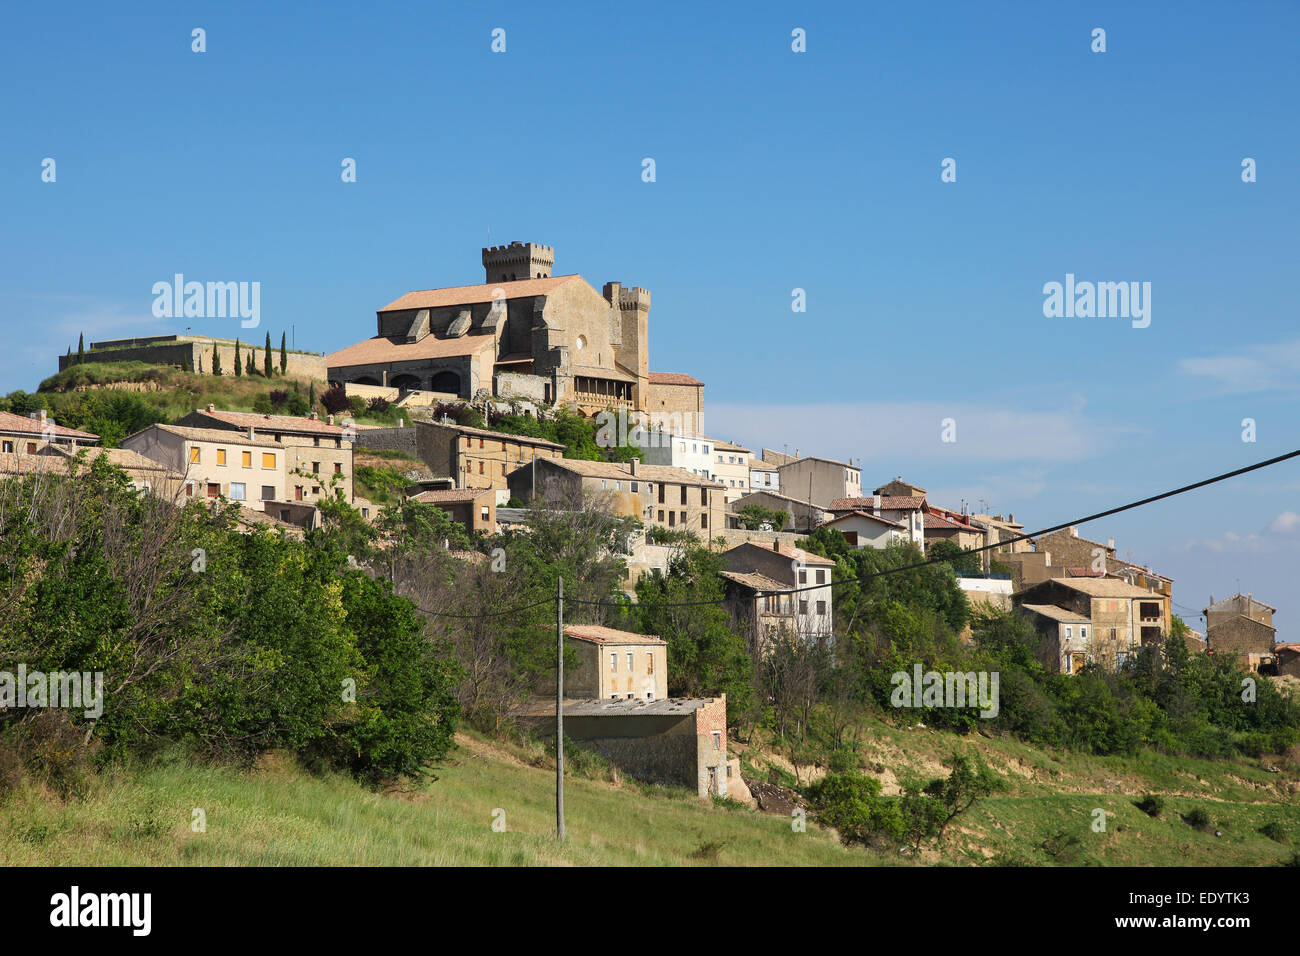 The town and 12th Century fortified church of Santa Maria in Ujue, (Uxue in Basque), a town in Navarre, Spain Stock Photo